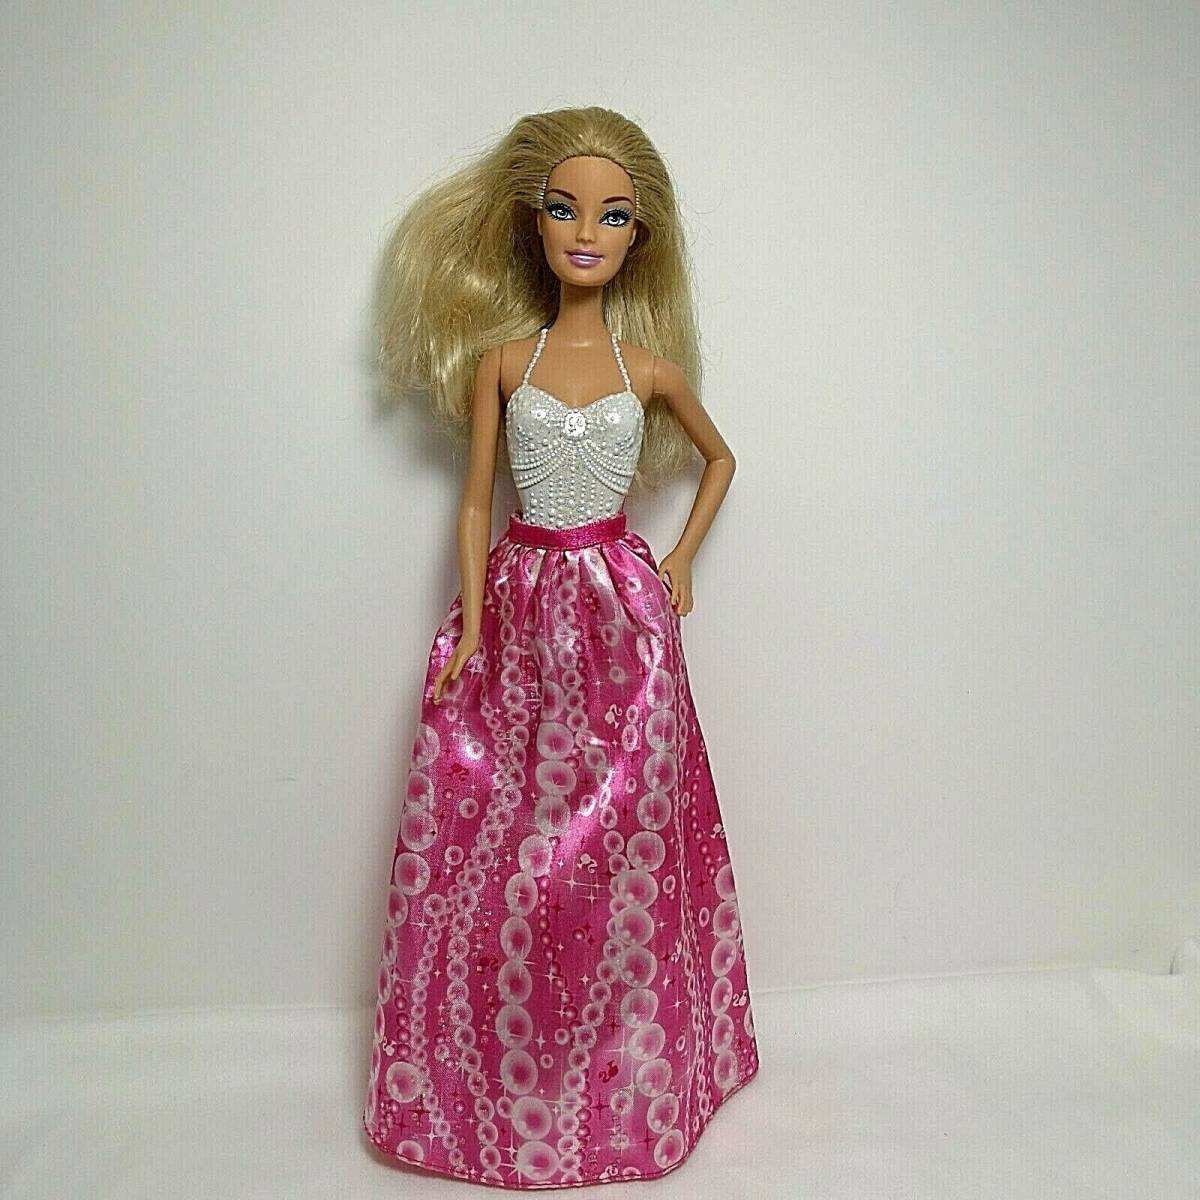 Mattel x9439 Barbie fairytale princess Fashion doll Pink and white (AS) 海外 即決